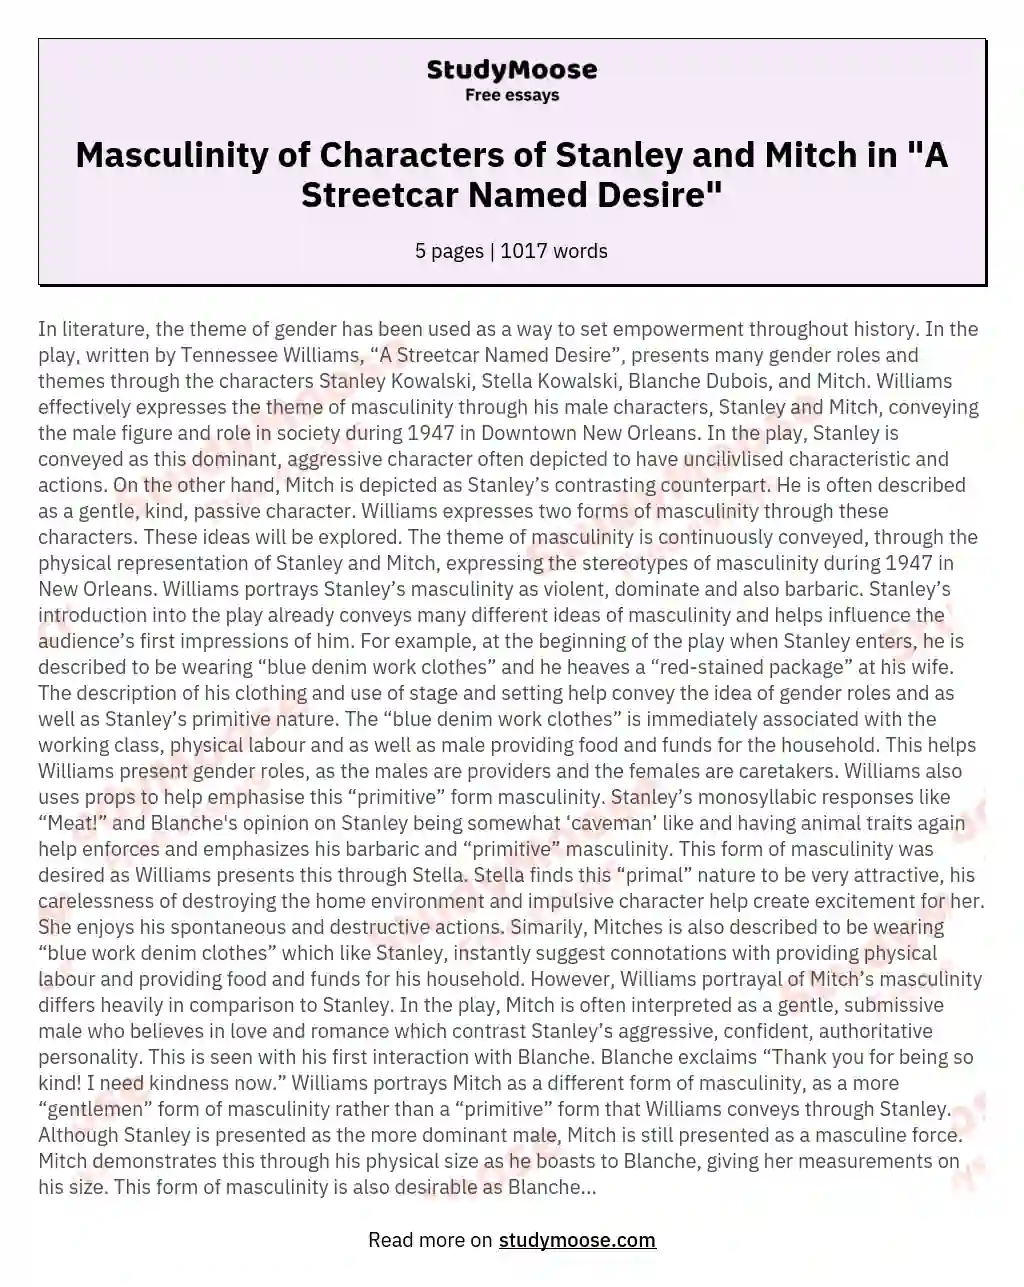 Masculinity of Characters of Stanley and Mitch in "A Streetcar Named Desire"